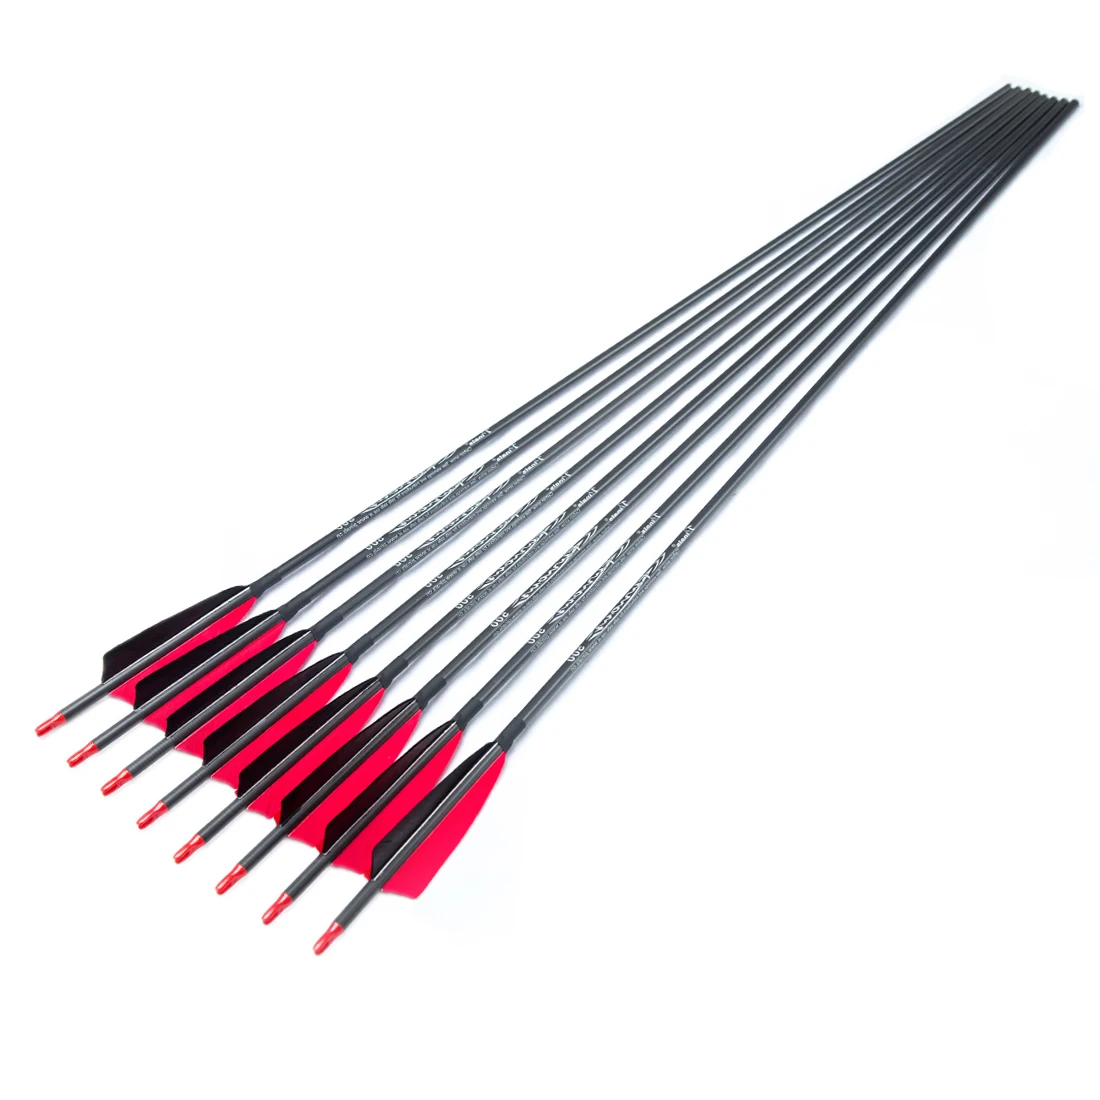 FengYang Archery Carbon Arrows 600 Spine 28 Inch Vanes for Compound Recurve Bows 6 Pack 